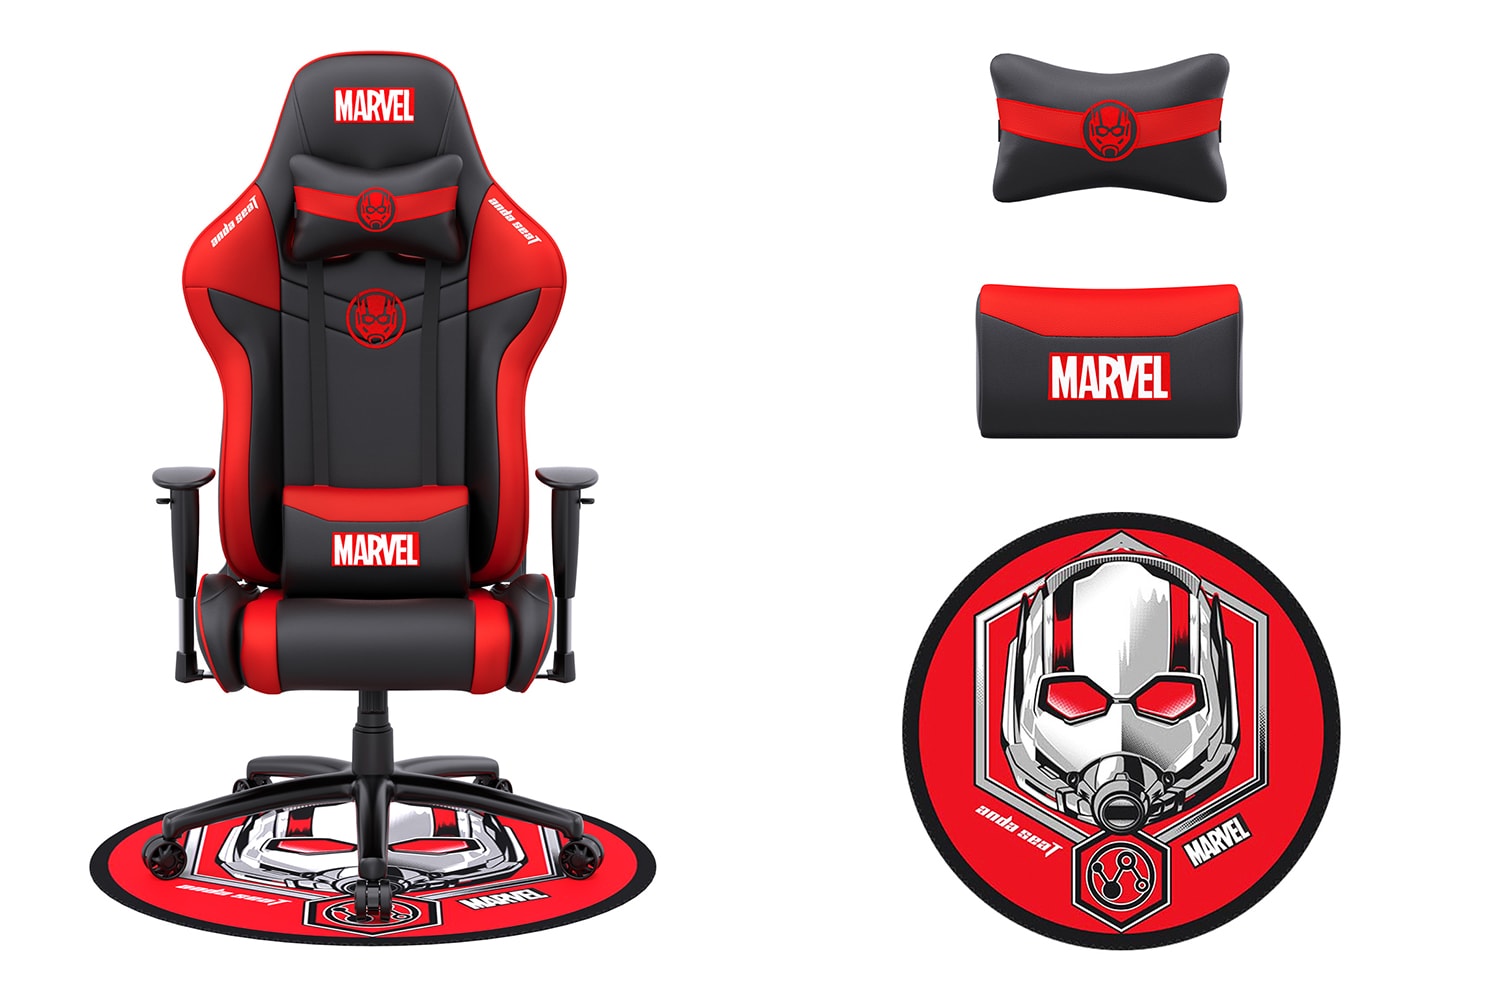 Disney Marvel Avengers AndaSeat Gaming Chairs Release Info Buy Price Captain America Iron Man Spider-Man Ant Man